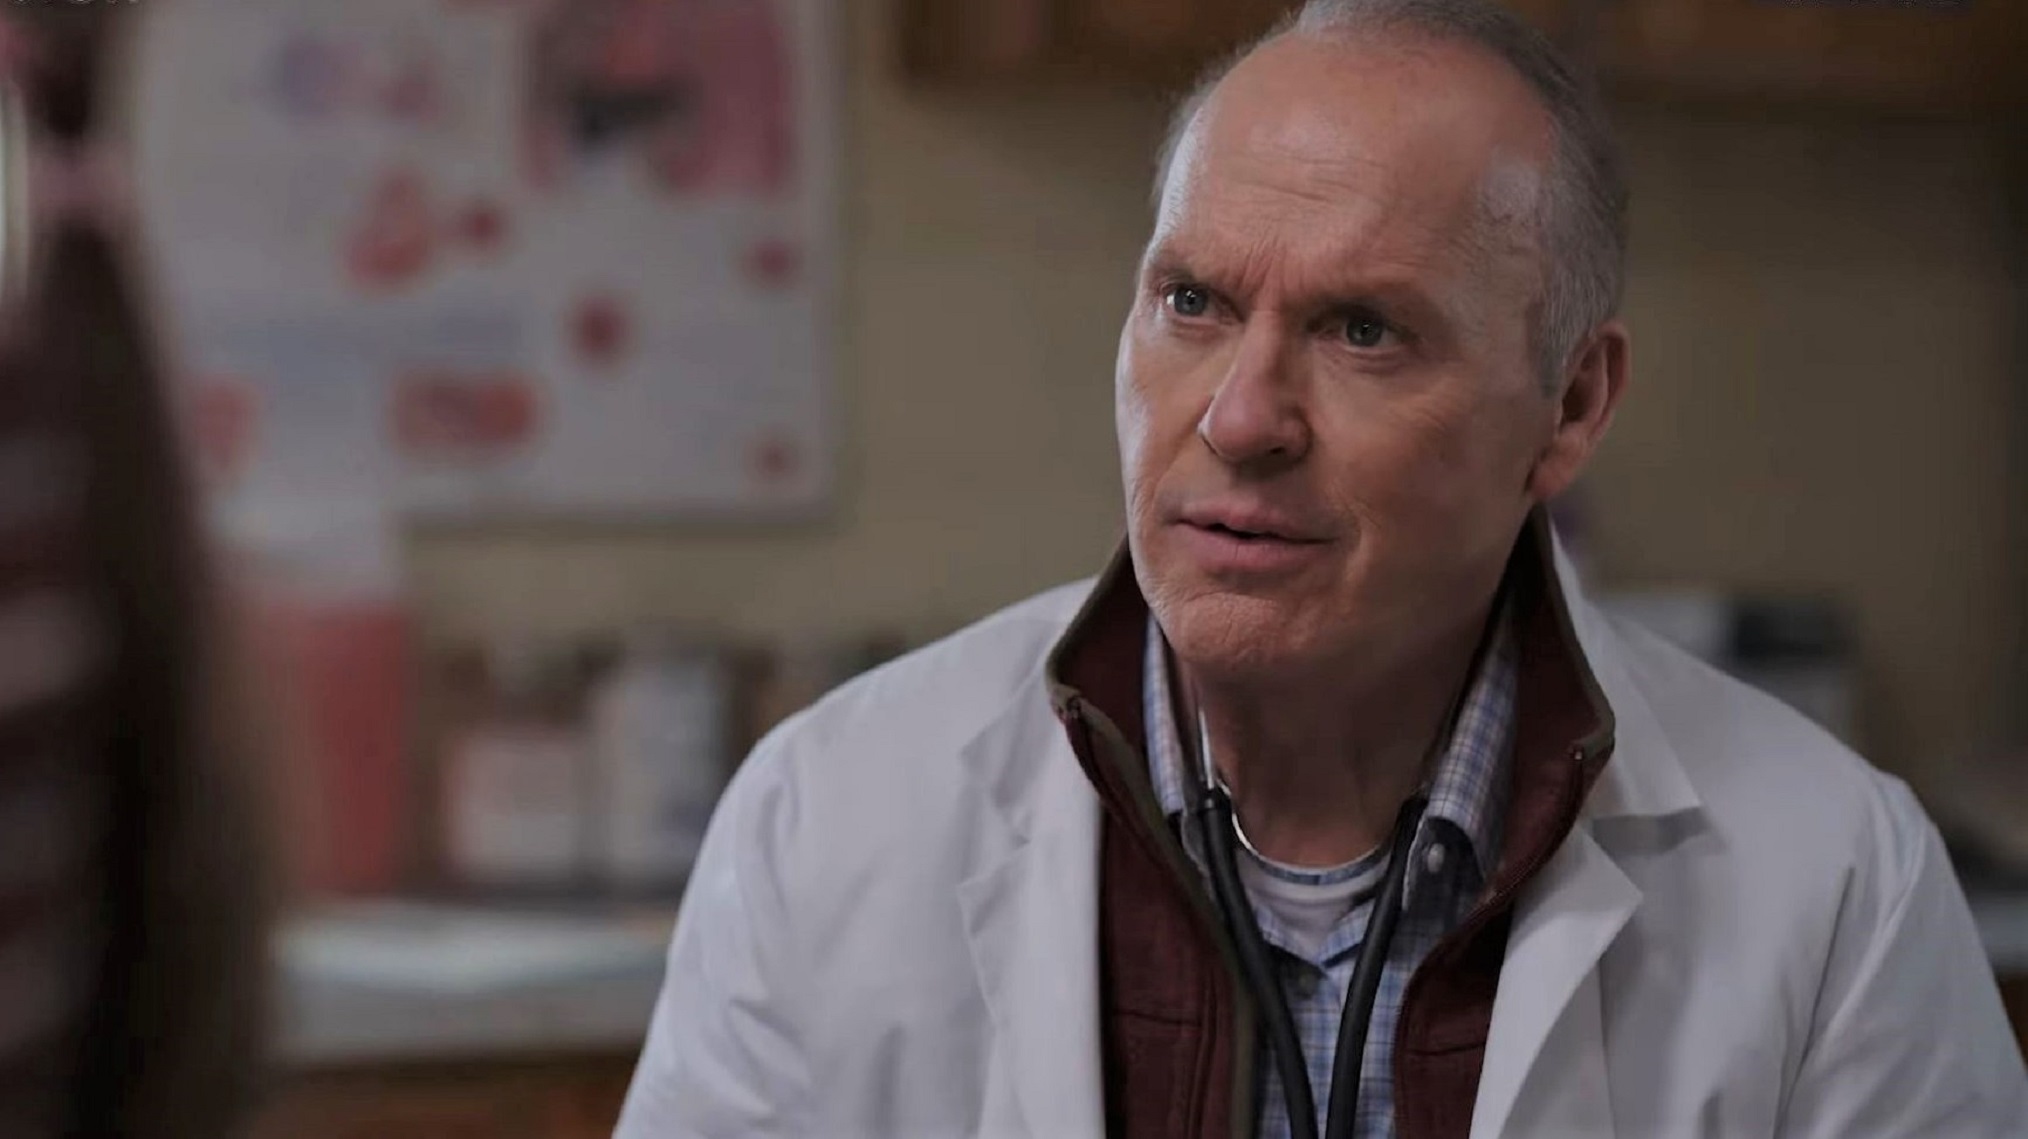 Dopesick&#39;: Michael Keaton Is a Skeptical Doctor in a First Look at Opioid Drama (VIDEO)